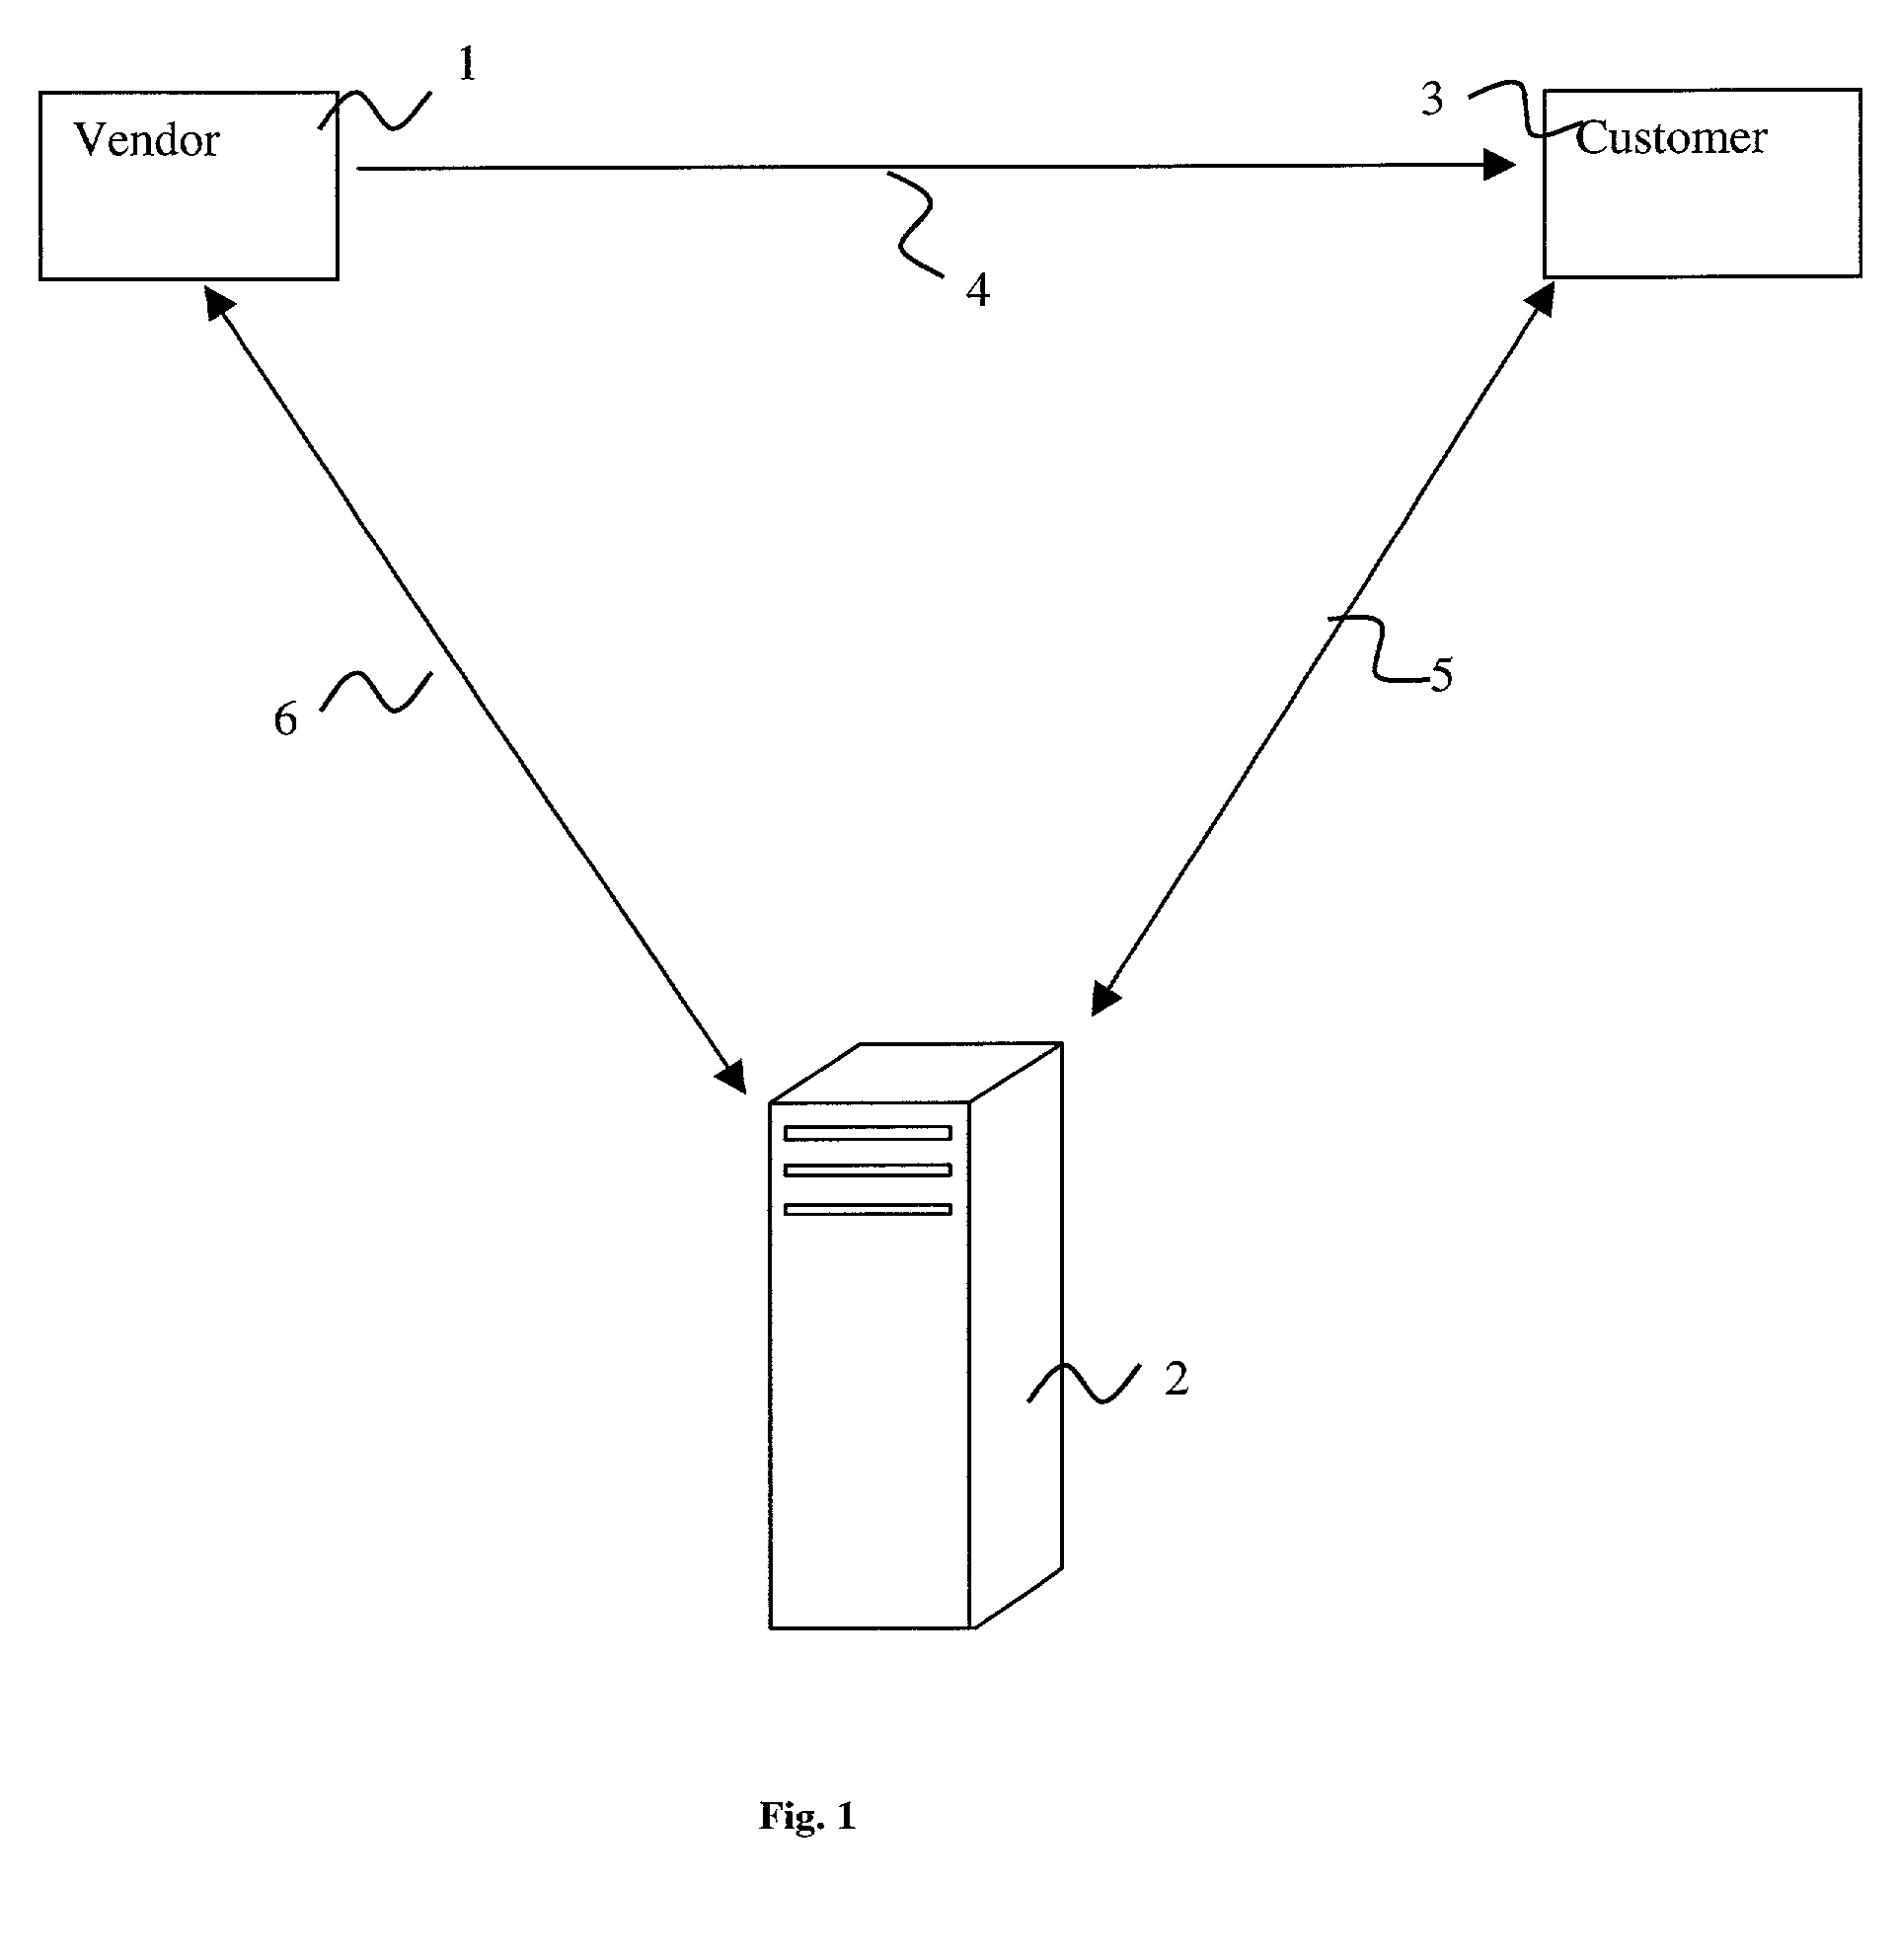 Method and system for recording evidence of assent